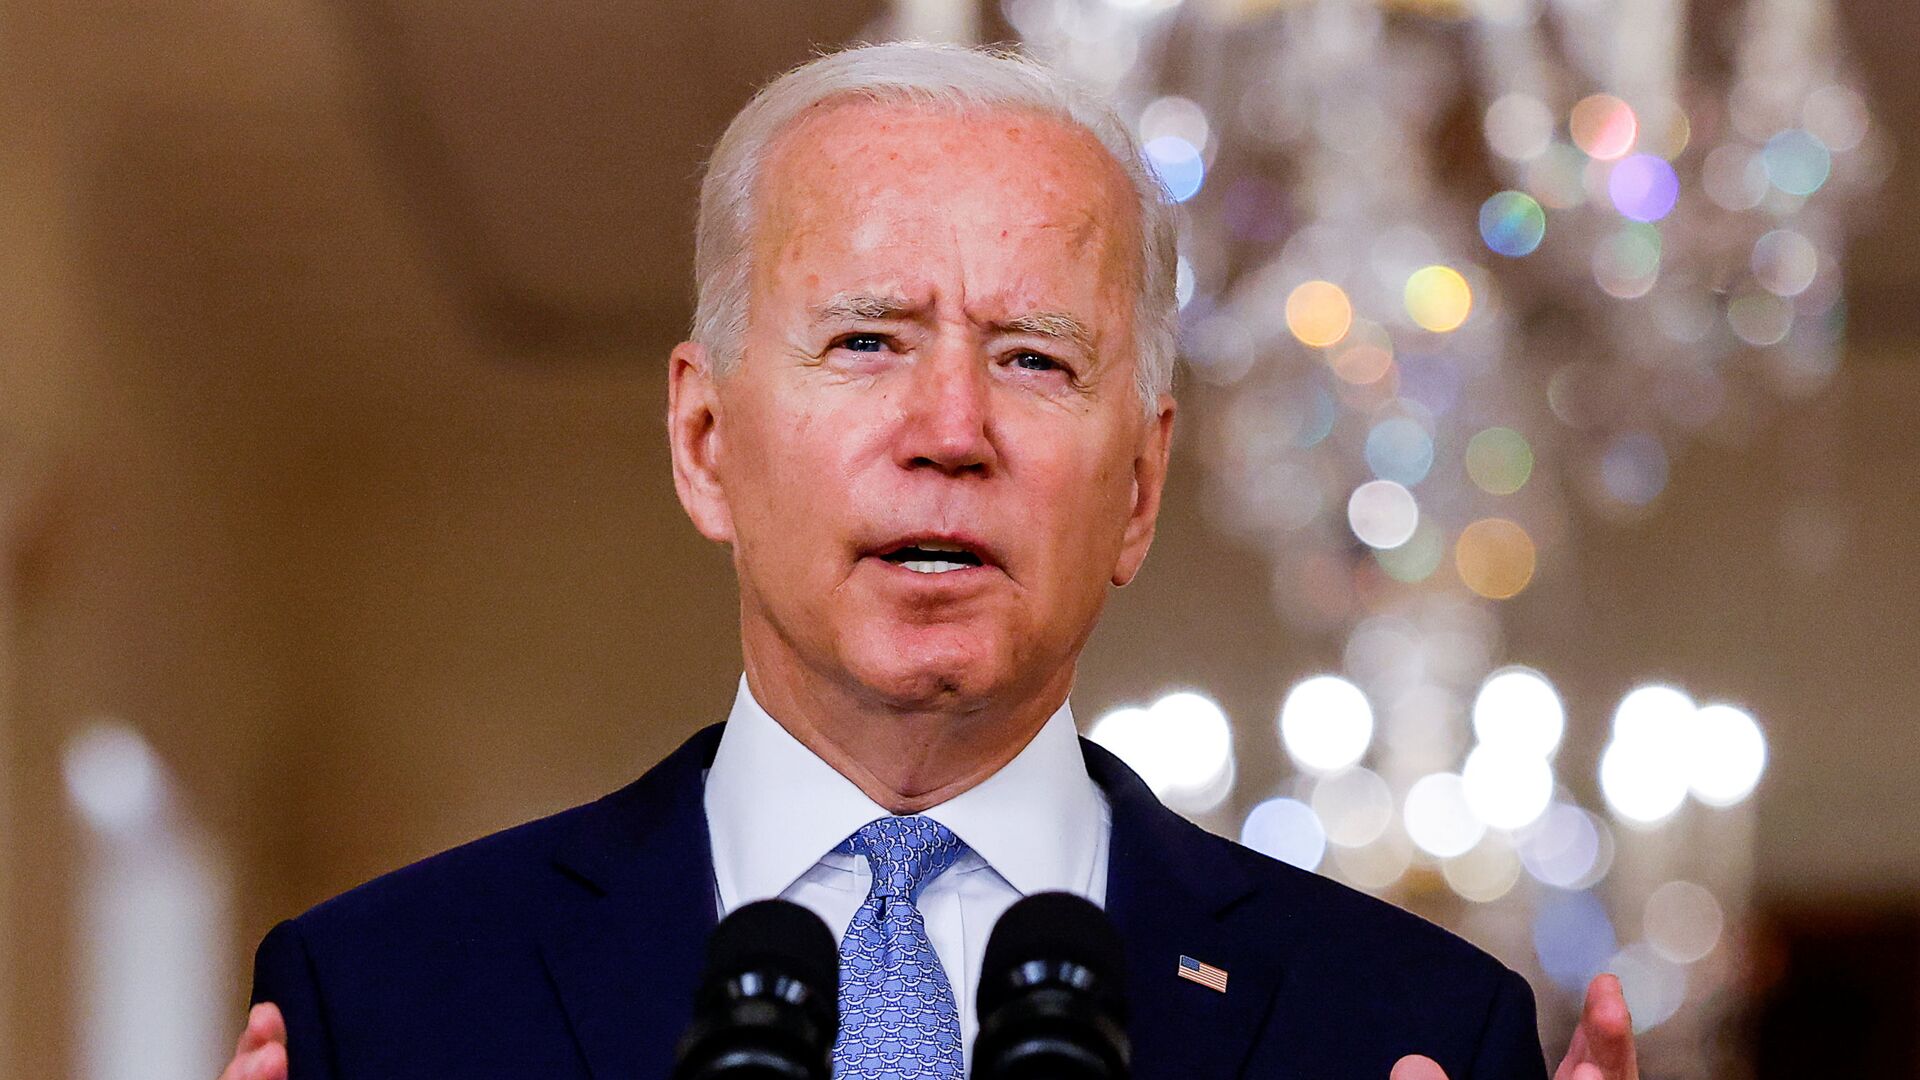 U.S. President Joe Biden delivers remarks on Afghanistan during a speech in the State Dining Room at the White House in Washington, U.S., August 31, 2021. - Sputnik International, 1920, 31.08.2021